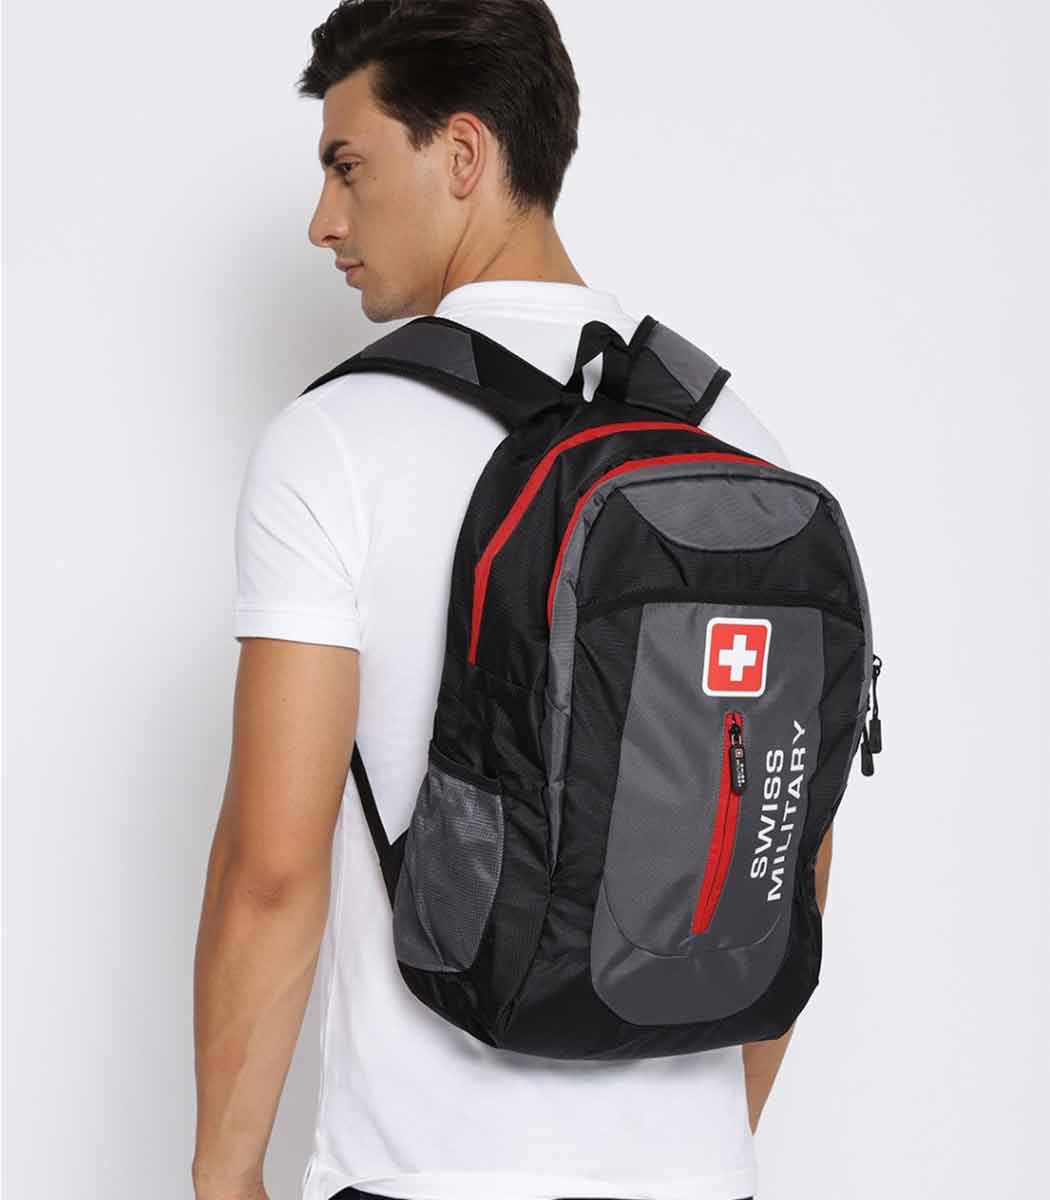 LBP40A Laptop Backpack Swiss Military Lifestyle Products Pvt. Ltd.